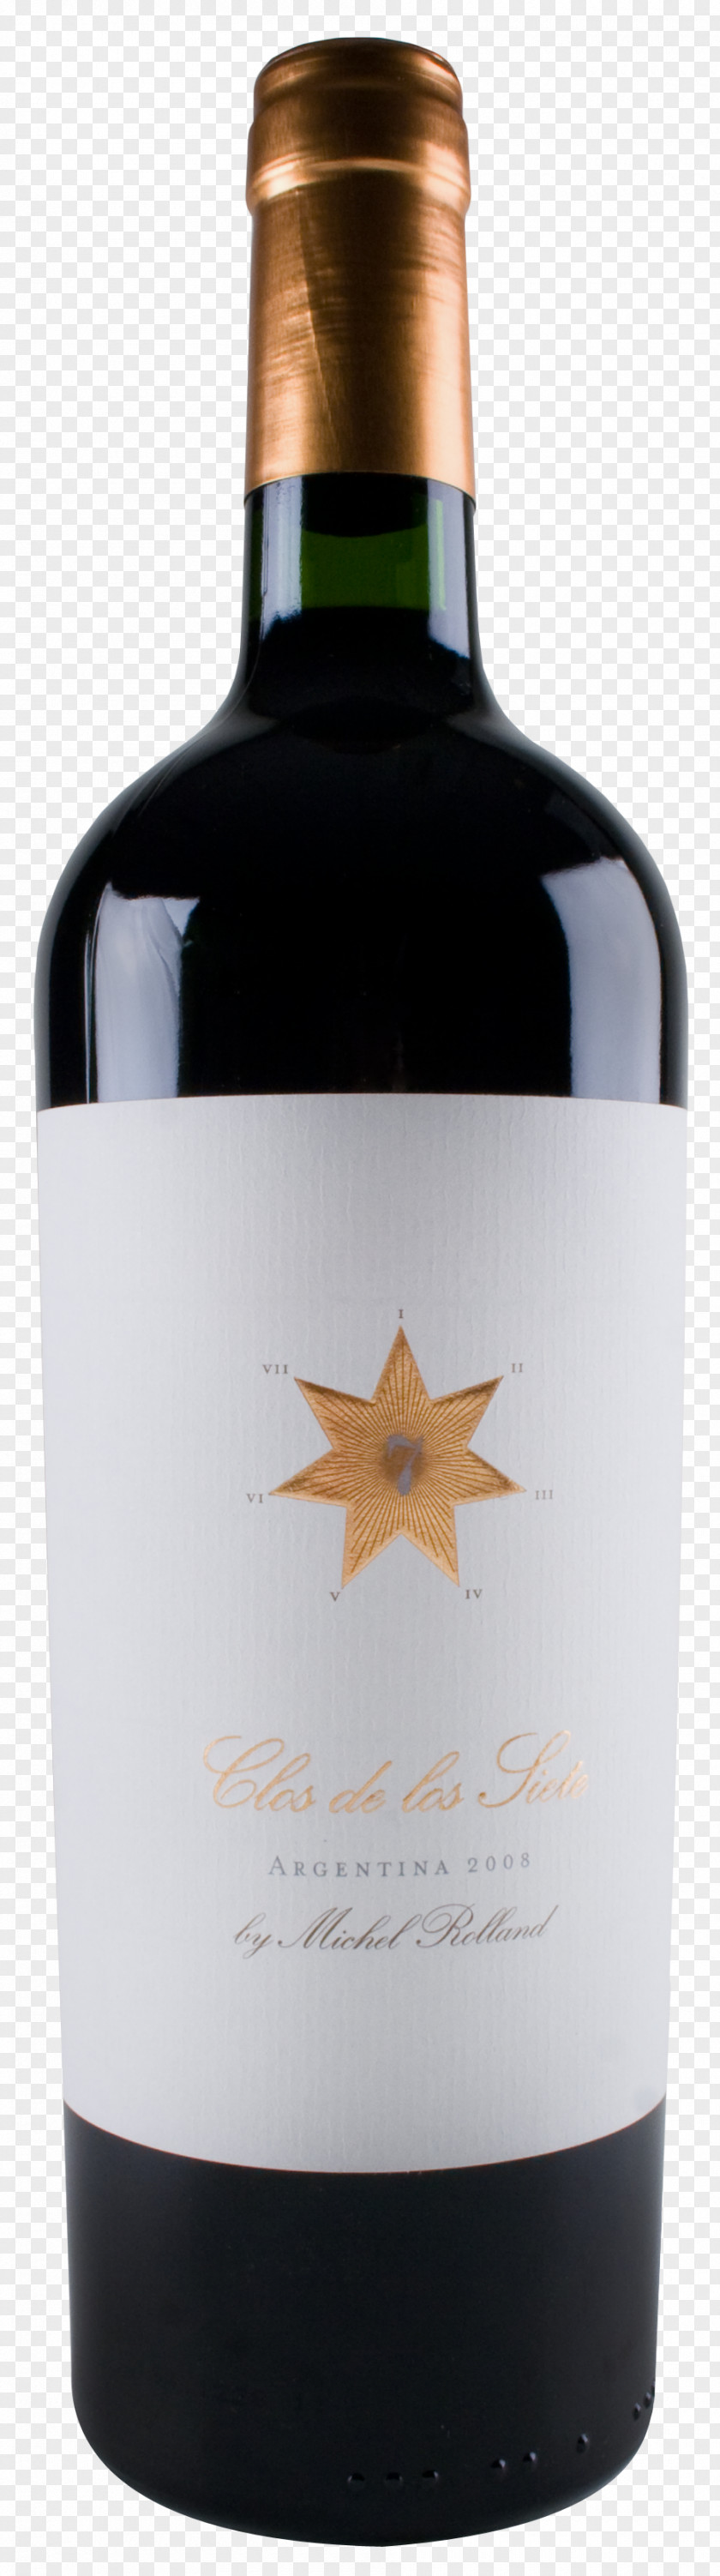 Bottle Image, Free Download Image Of Red Wine PNG